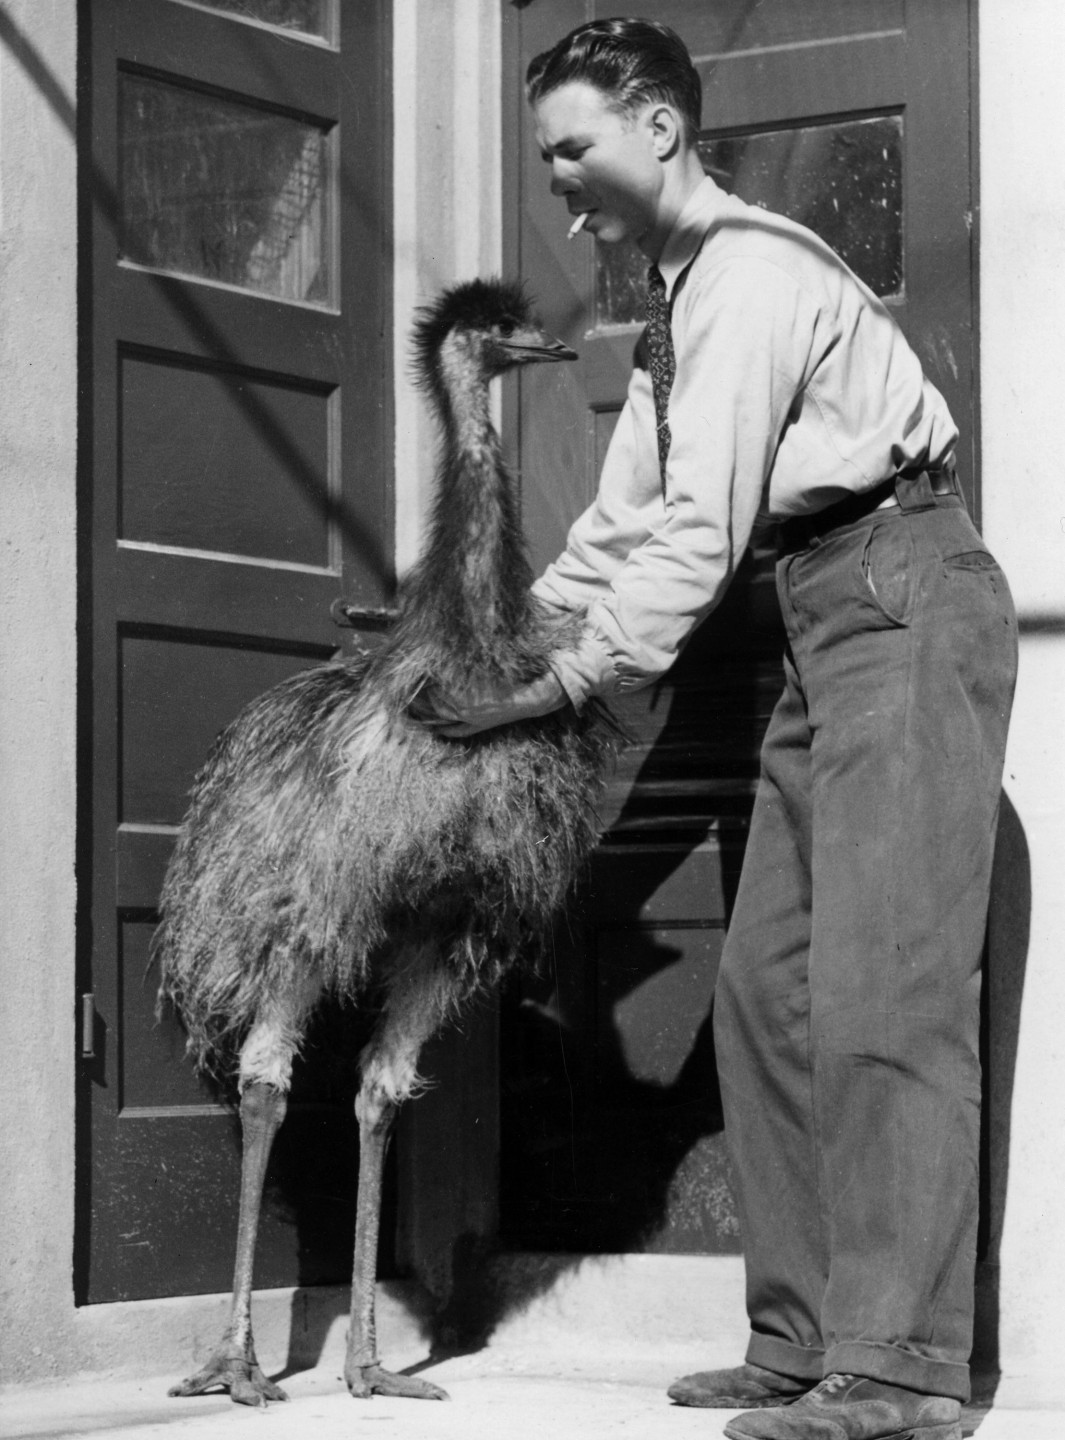 Bird keeper Kenton C. Lint and the emu chick he helped hatch and raise in electric incubators at the San Diego Zoo. Upon returning from his military service, K.C. gave credit to Belle Benchley for keeping the Zoo running during the war, saying, 